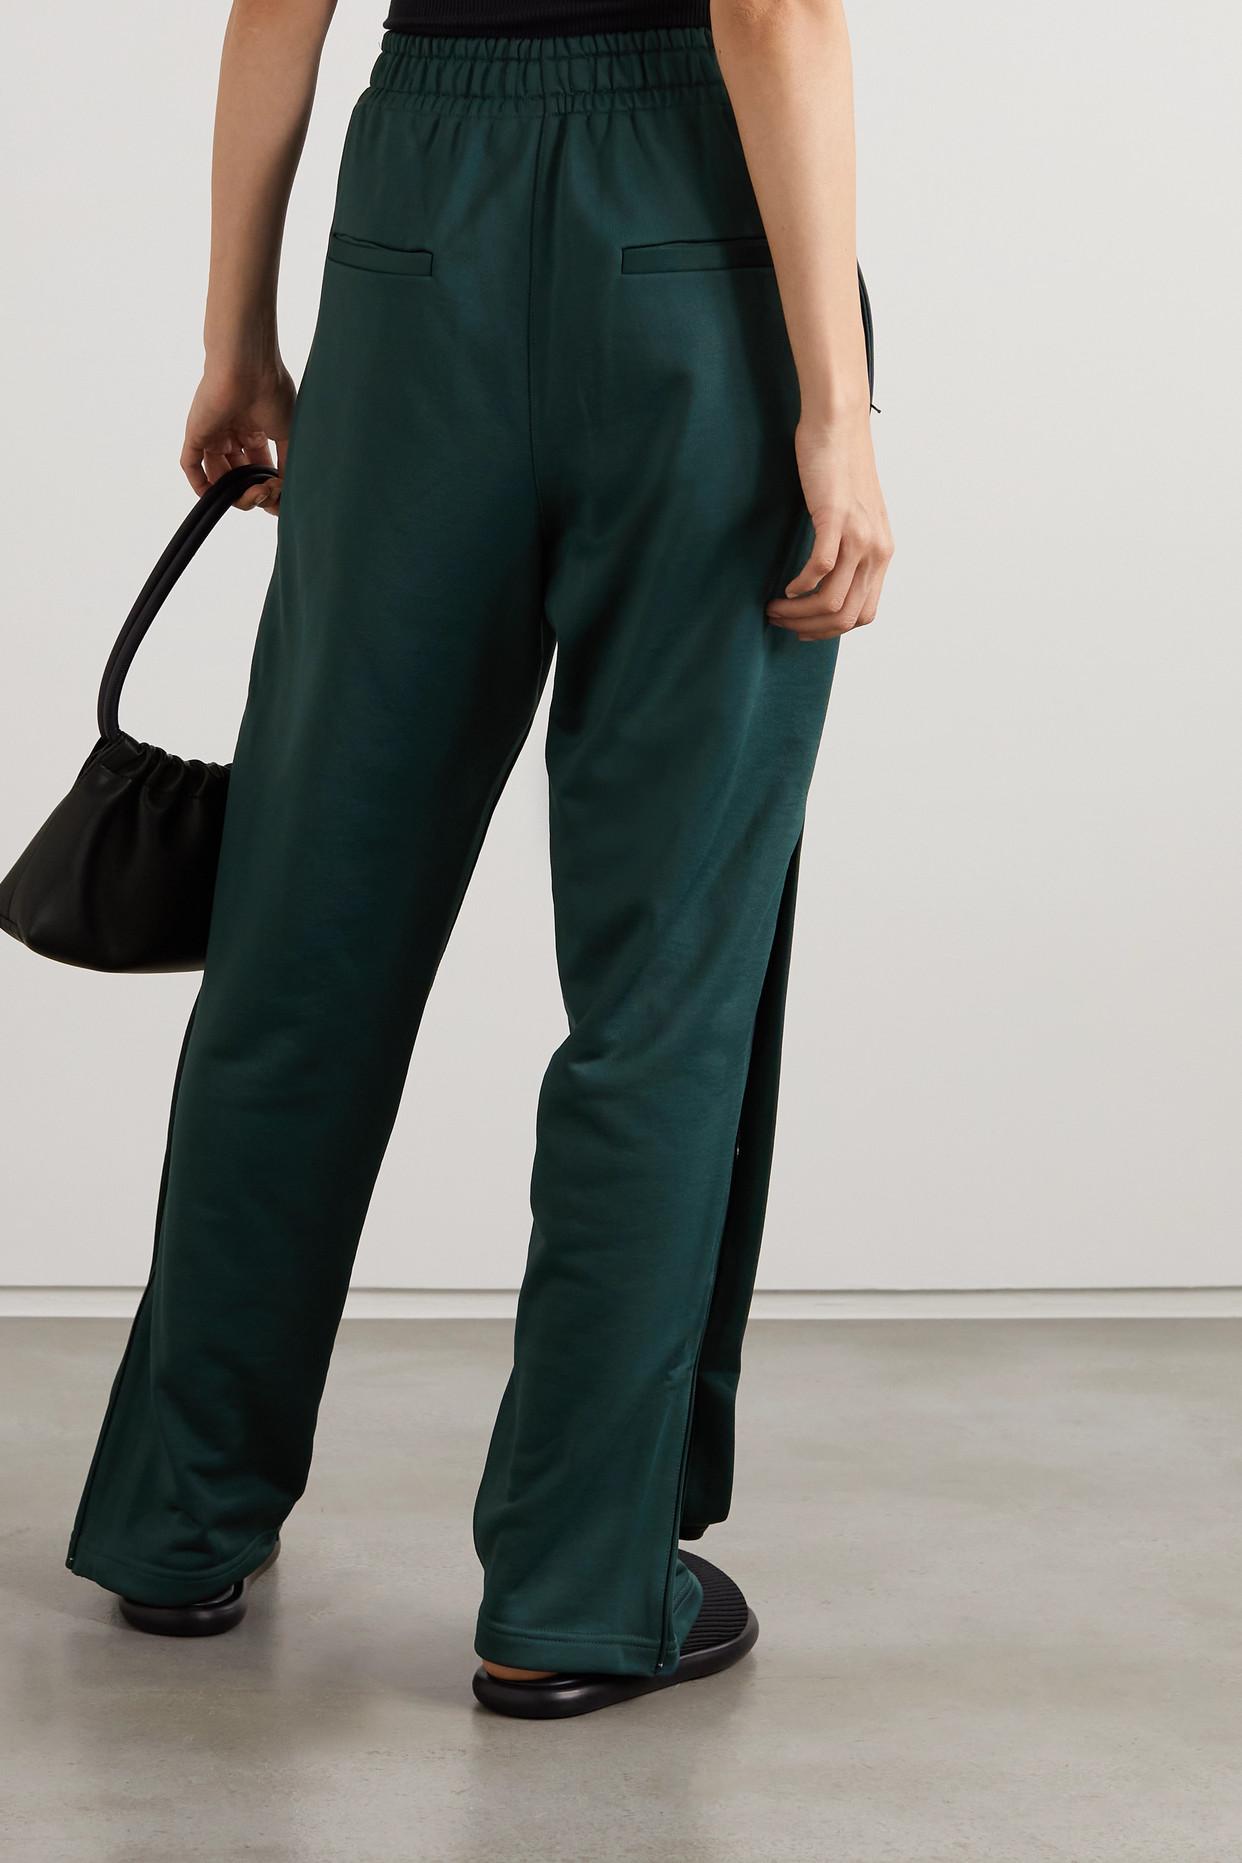 Étoile Isabel Marant Inaya Embroidered Jersey Track Pants in Green | Lyst